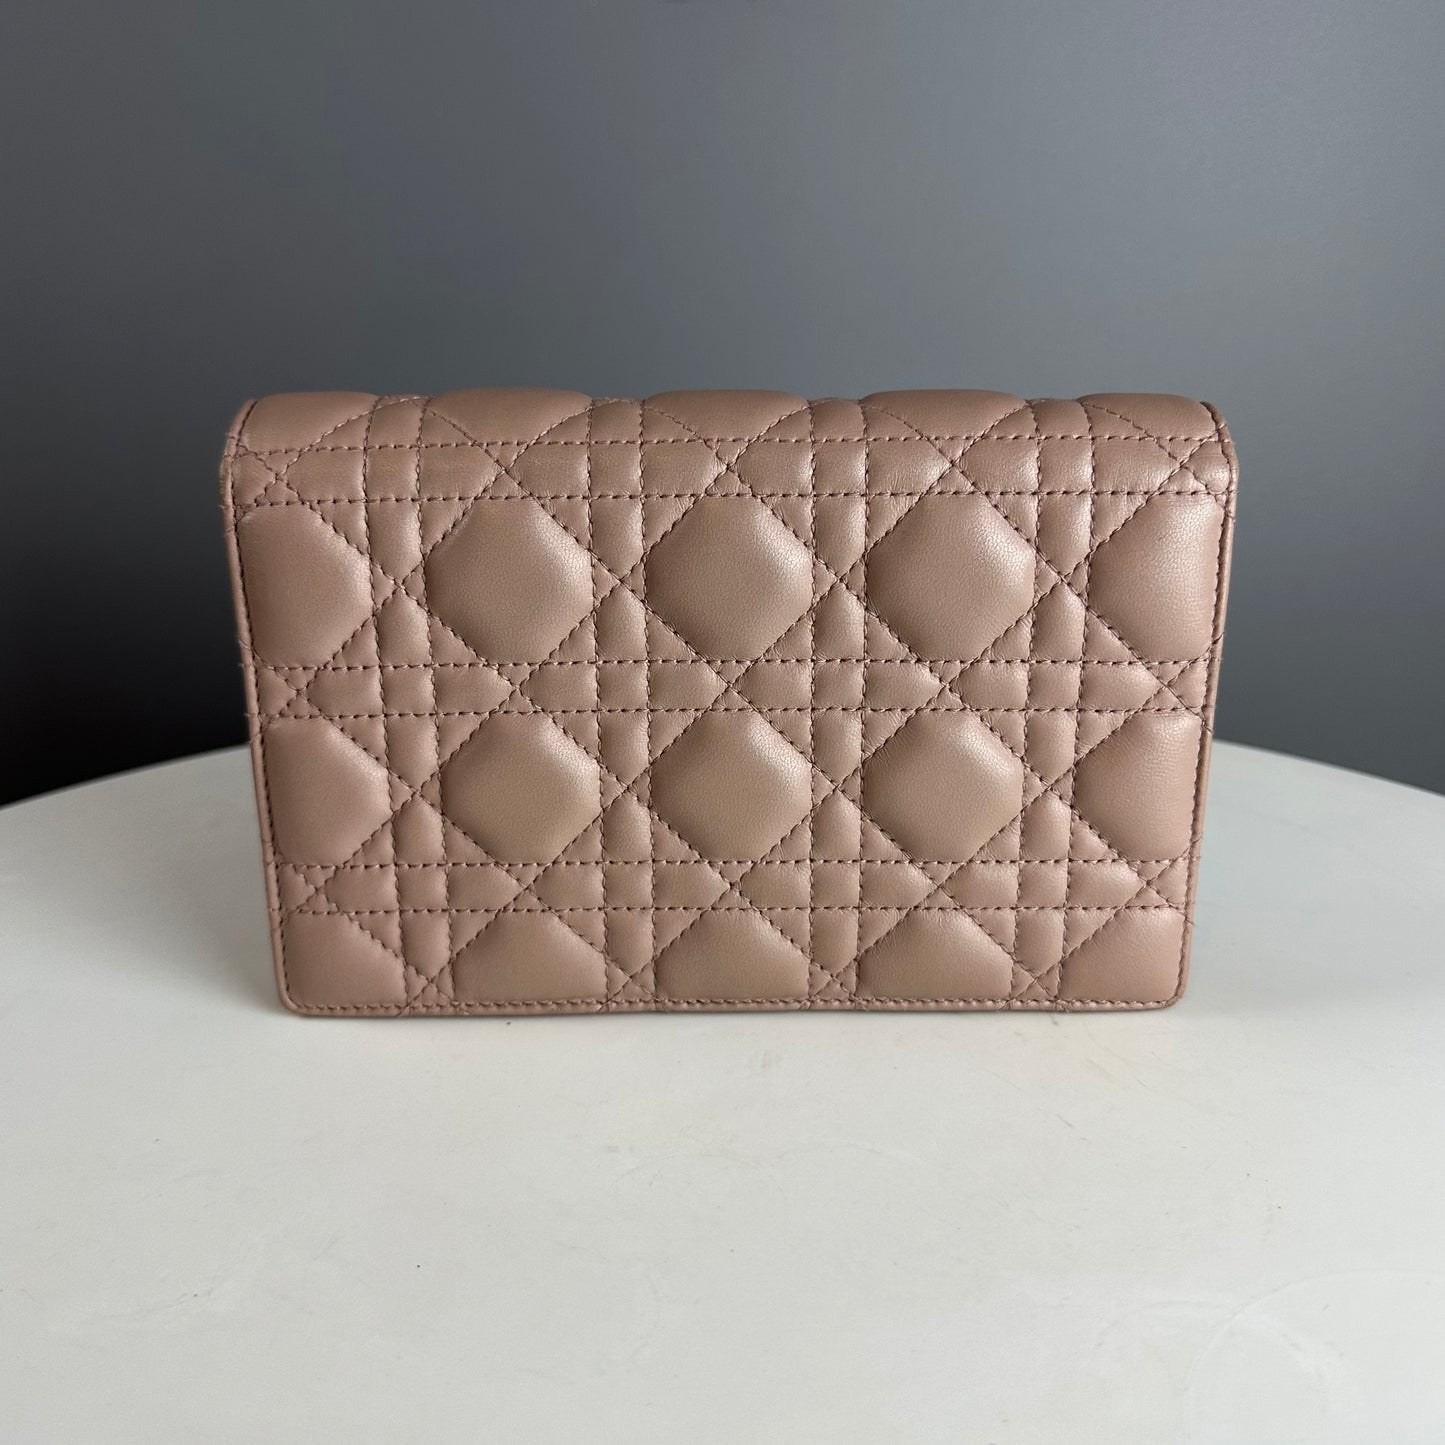 DIOR - Dioraddict wallet on chain pink leather